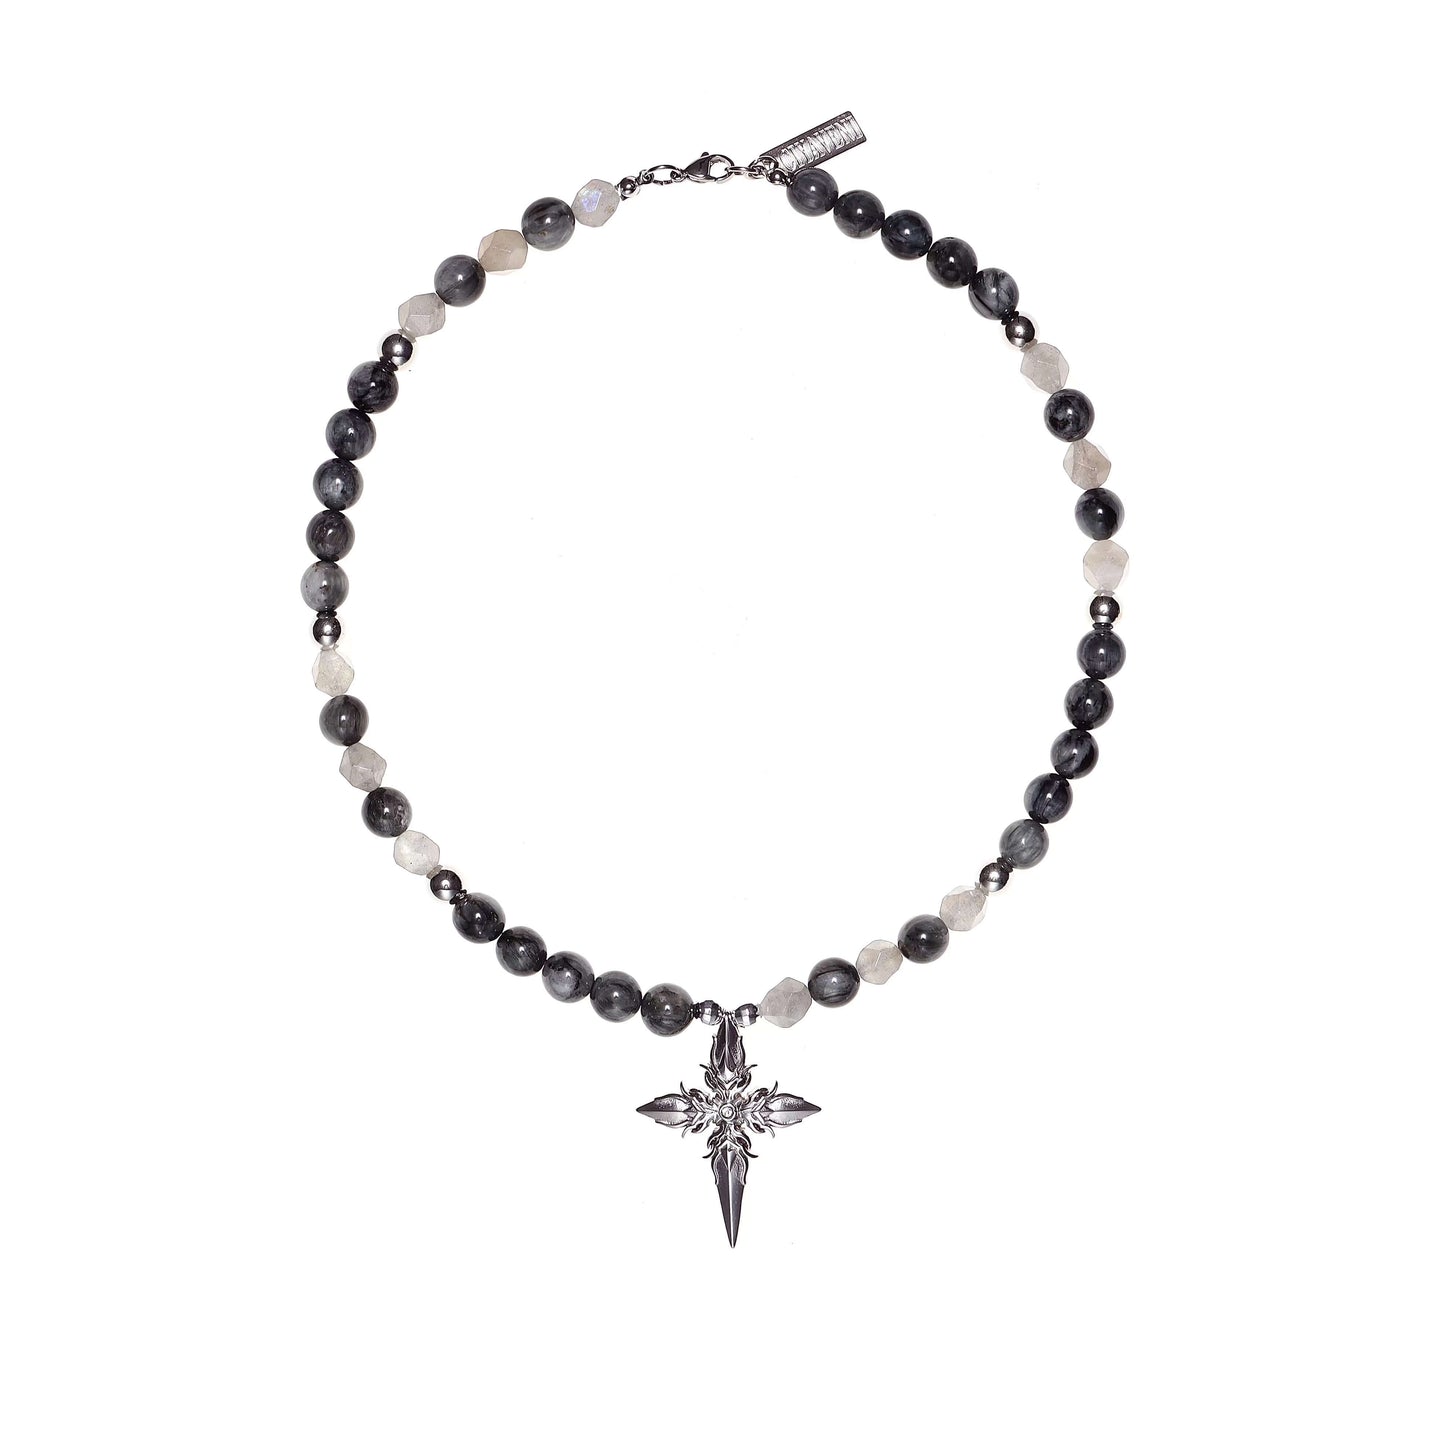 Eternal Star Agate Beaded Necklace | Buy at Khanie